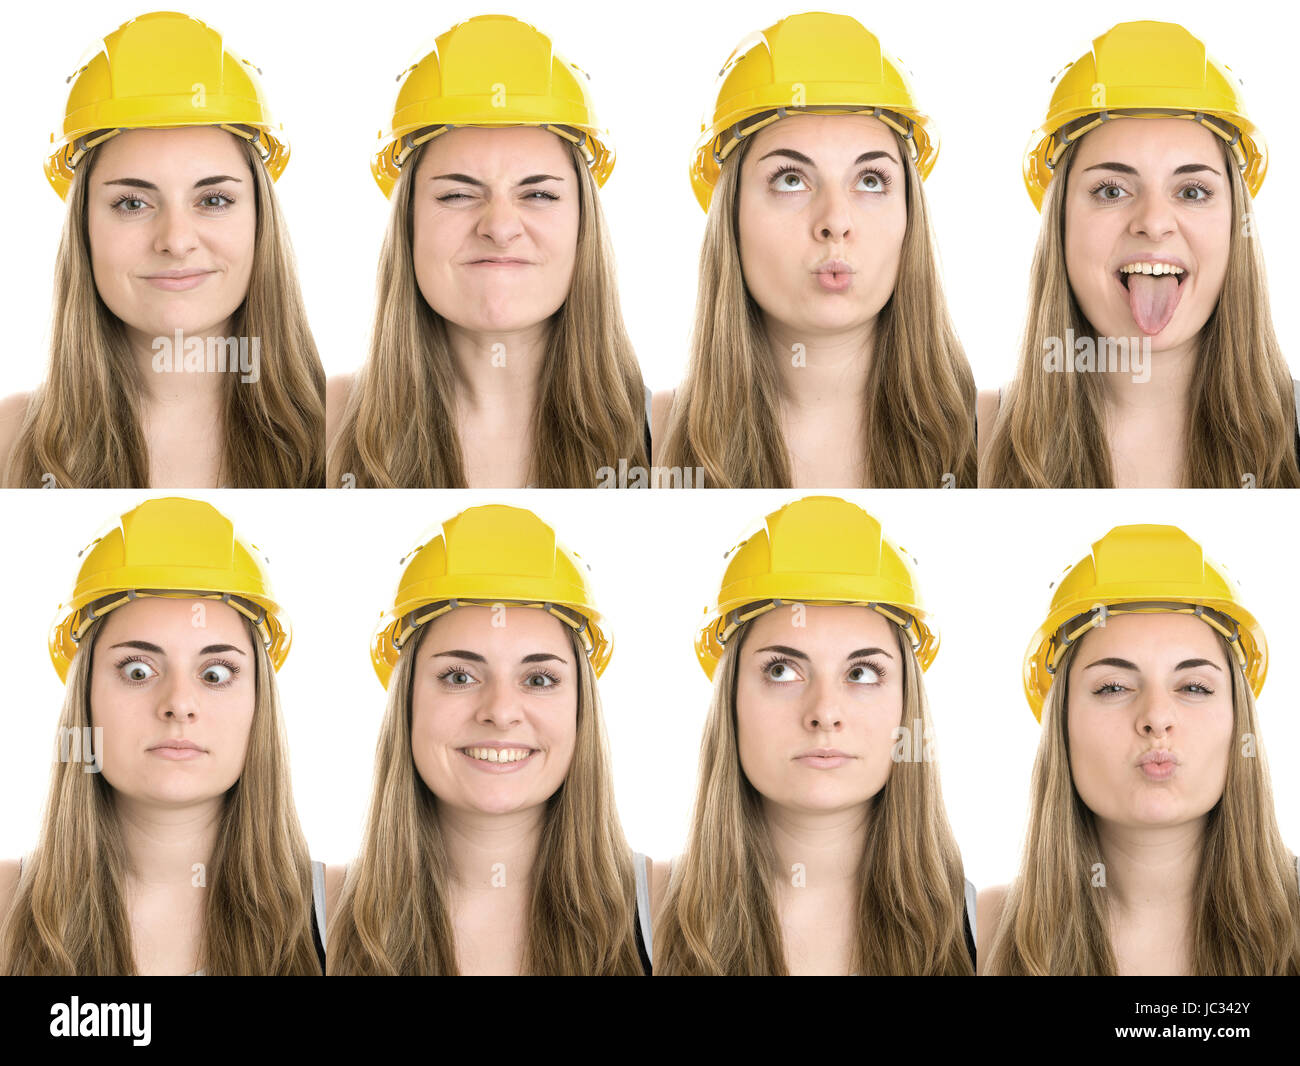 bauarbeiterin with various facial expressions Stock Photo